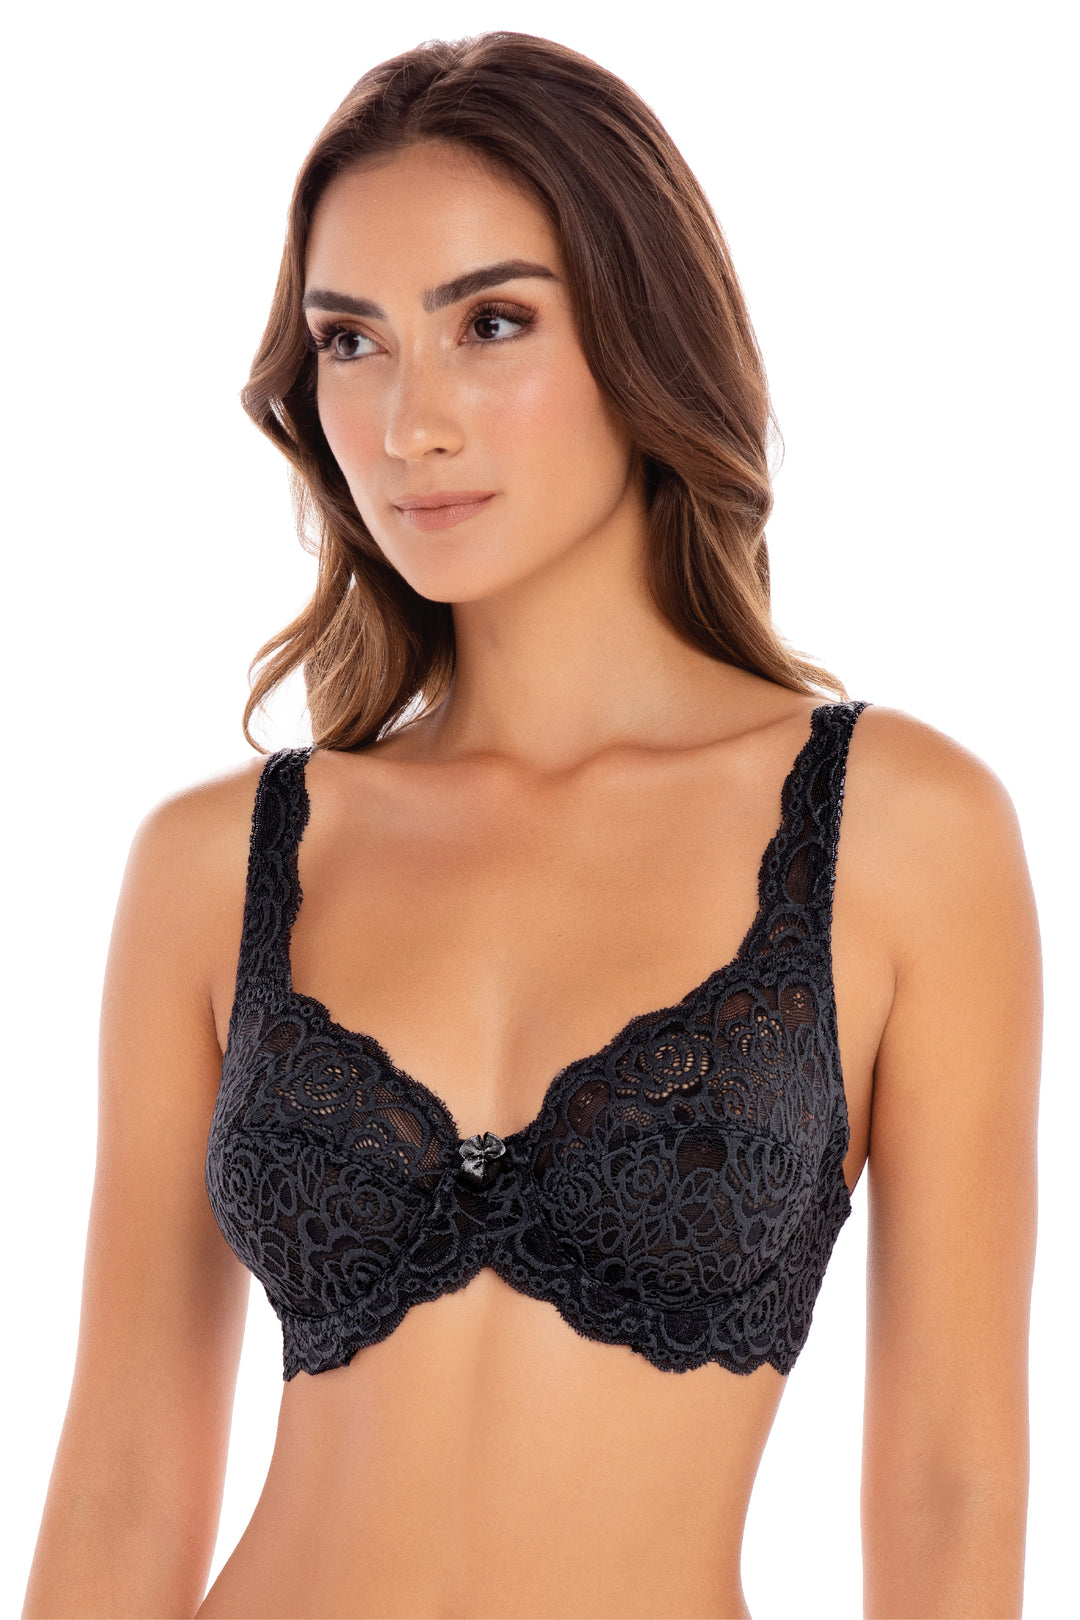 Rene Rofe 3 Pack - Double Push Up Bras - Floral Lace Underwire